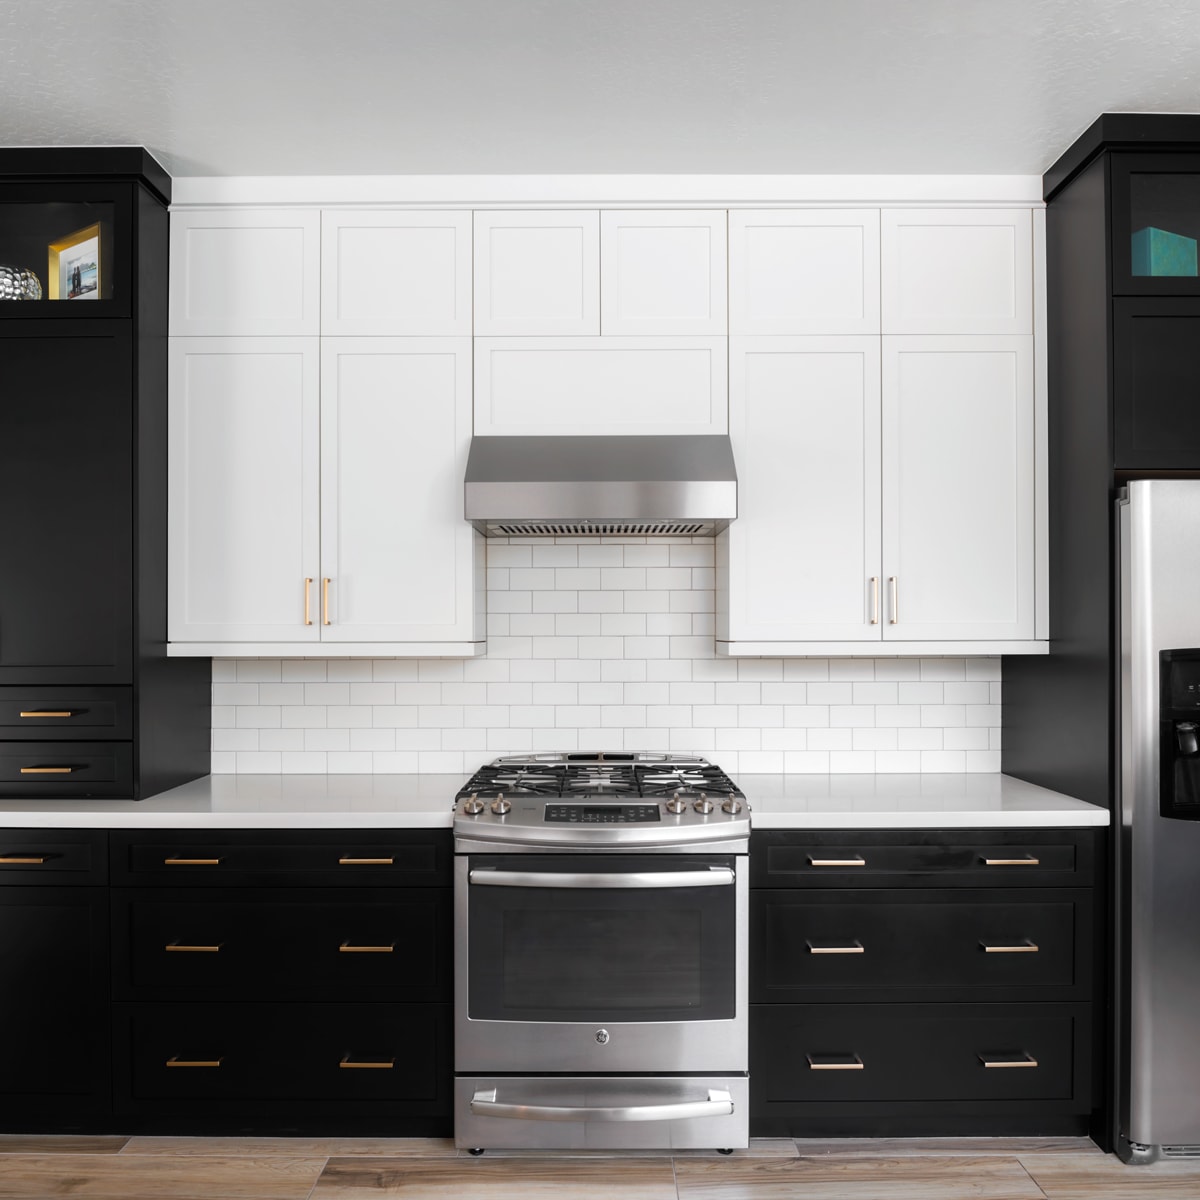 Tall white shaker cabinets and lower black shaker cabinets with a stove in the middle.